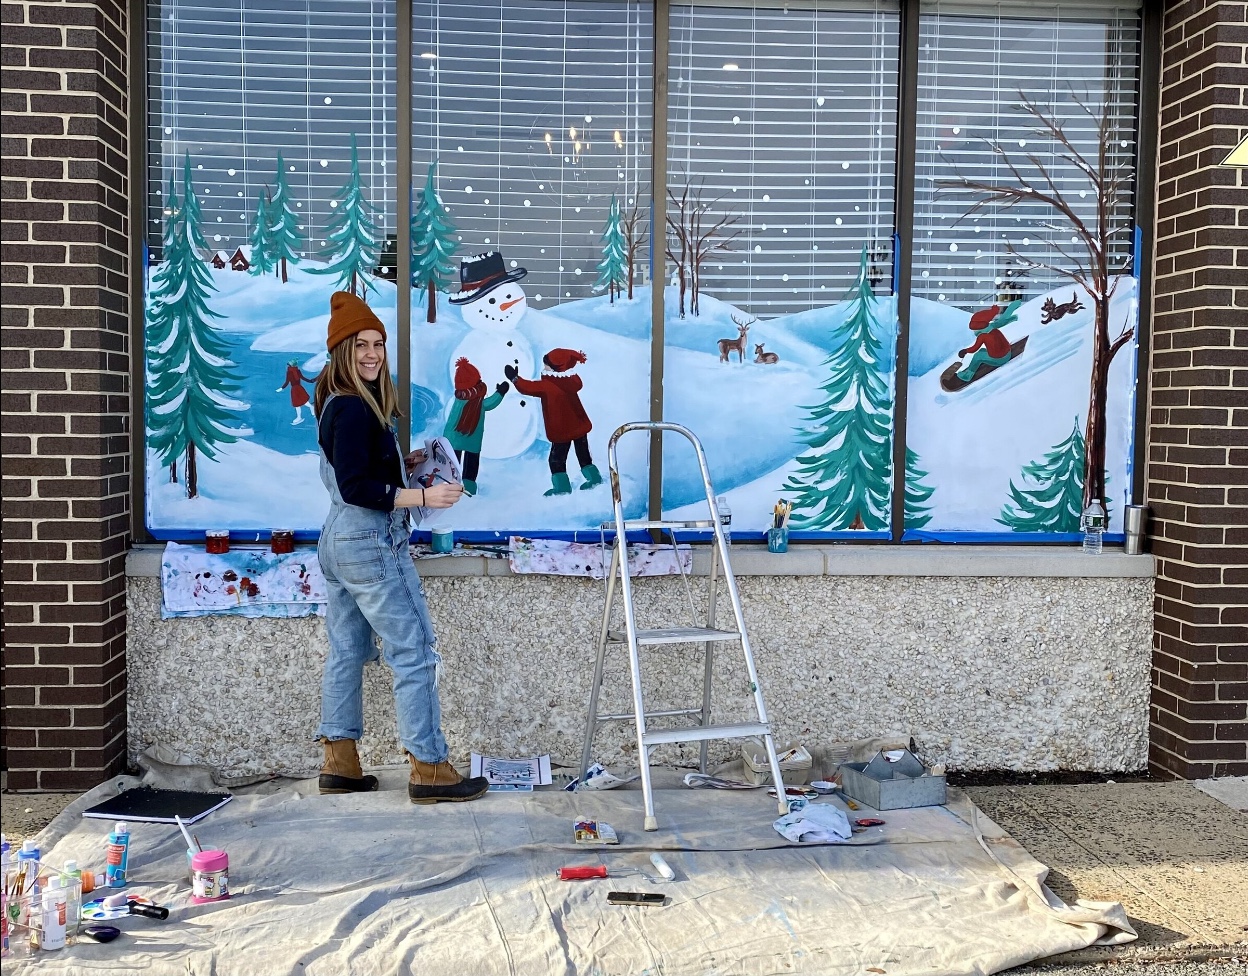 A woman stands next to a wall mural she is painting of a snowy scene outdoors on a window.